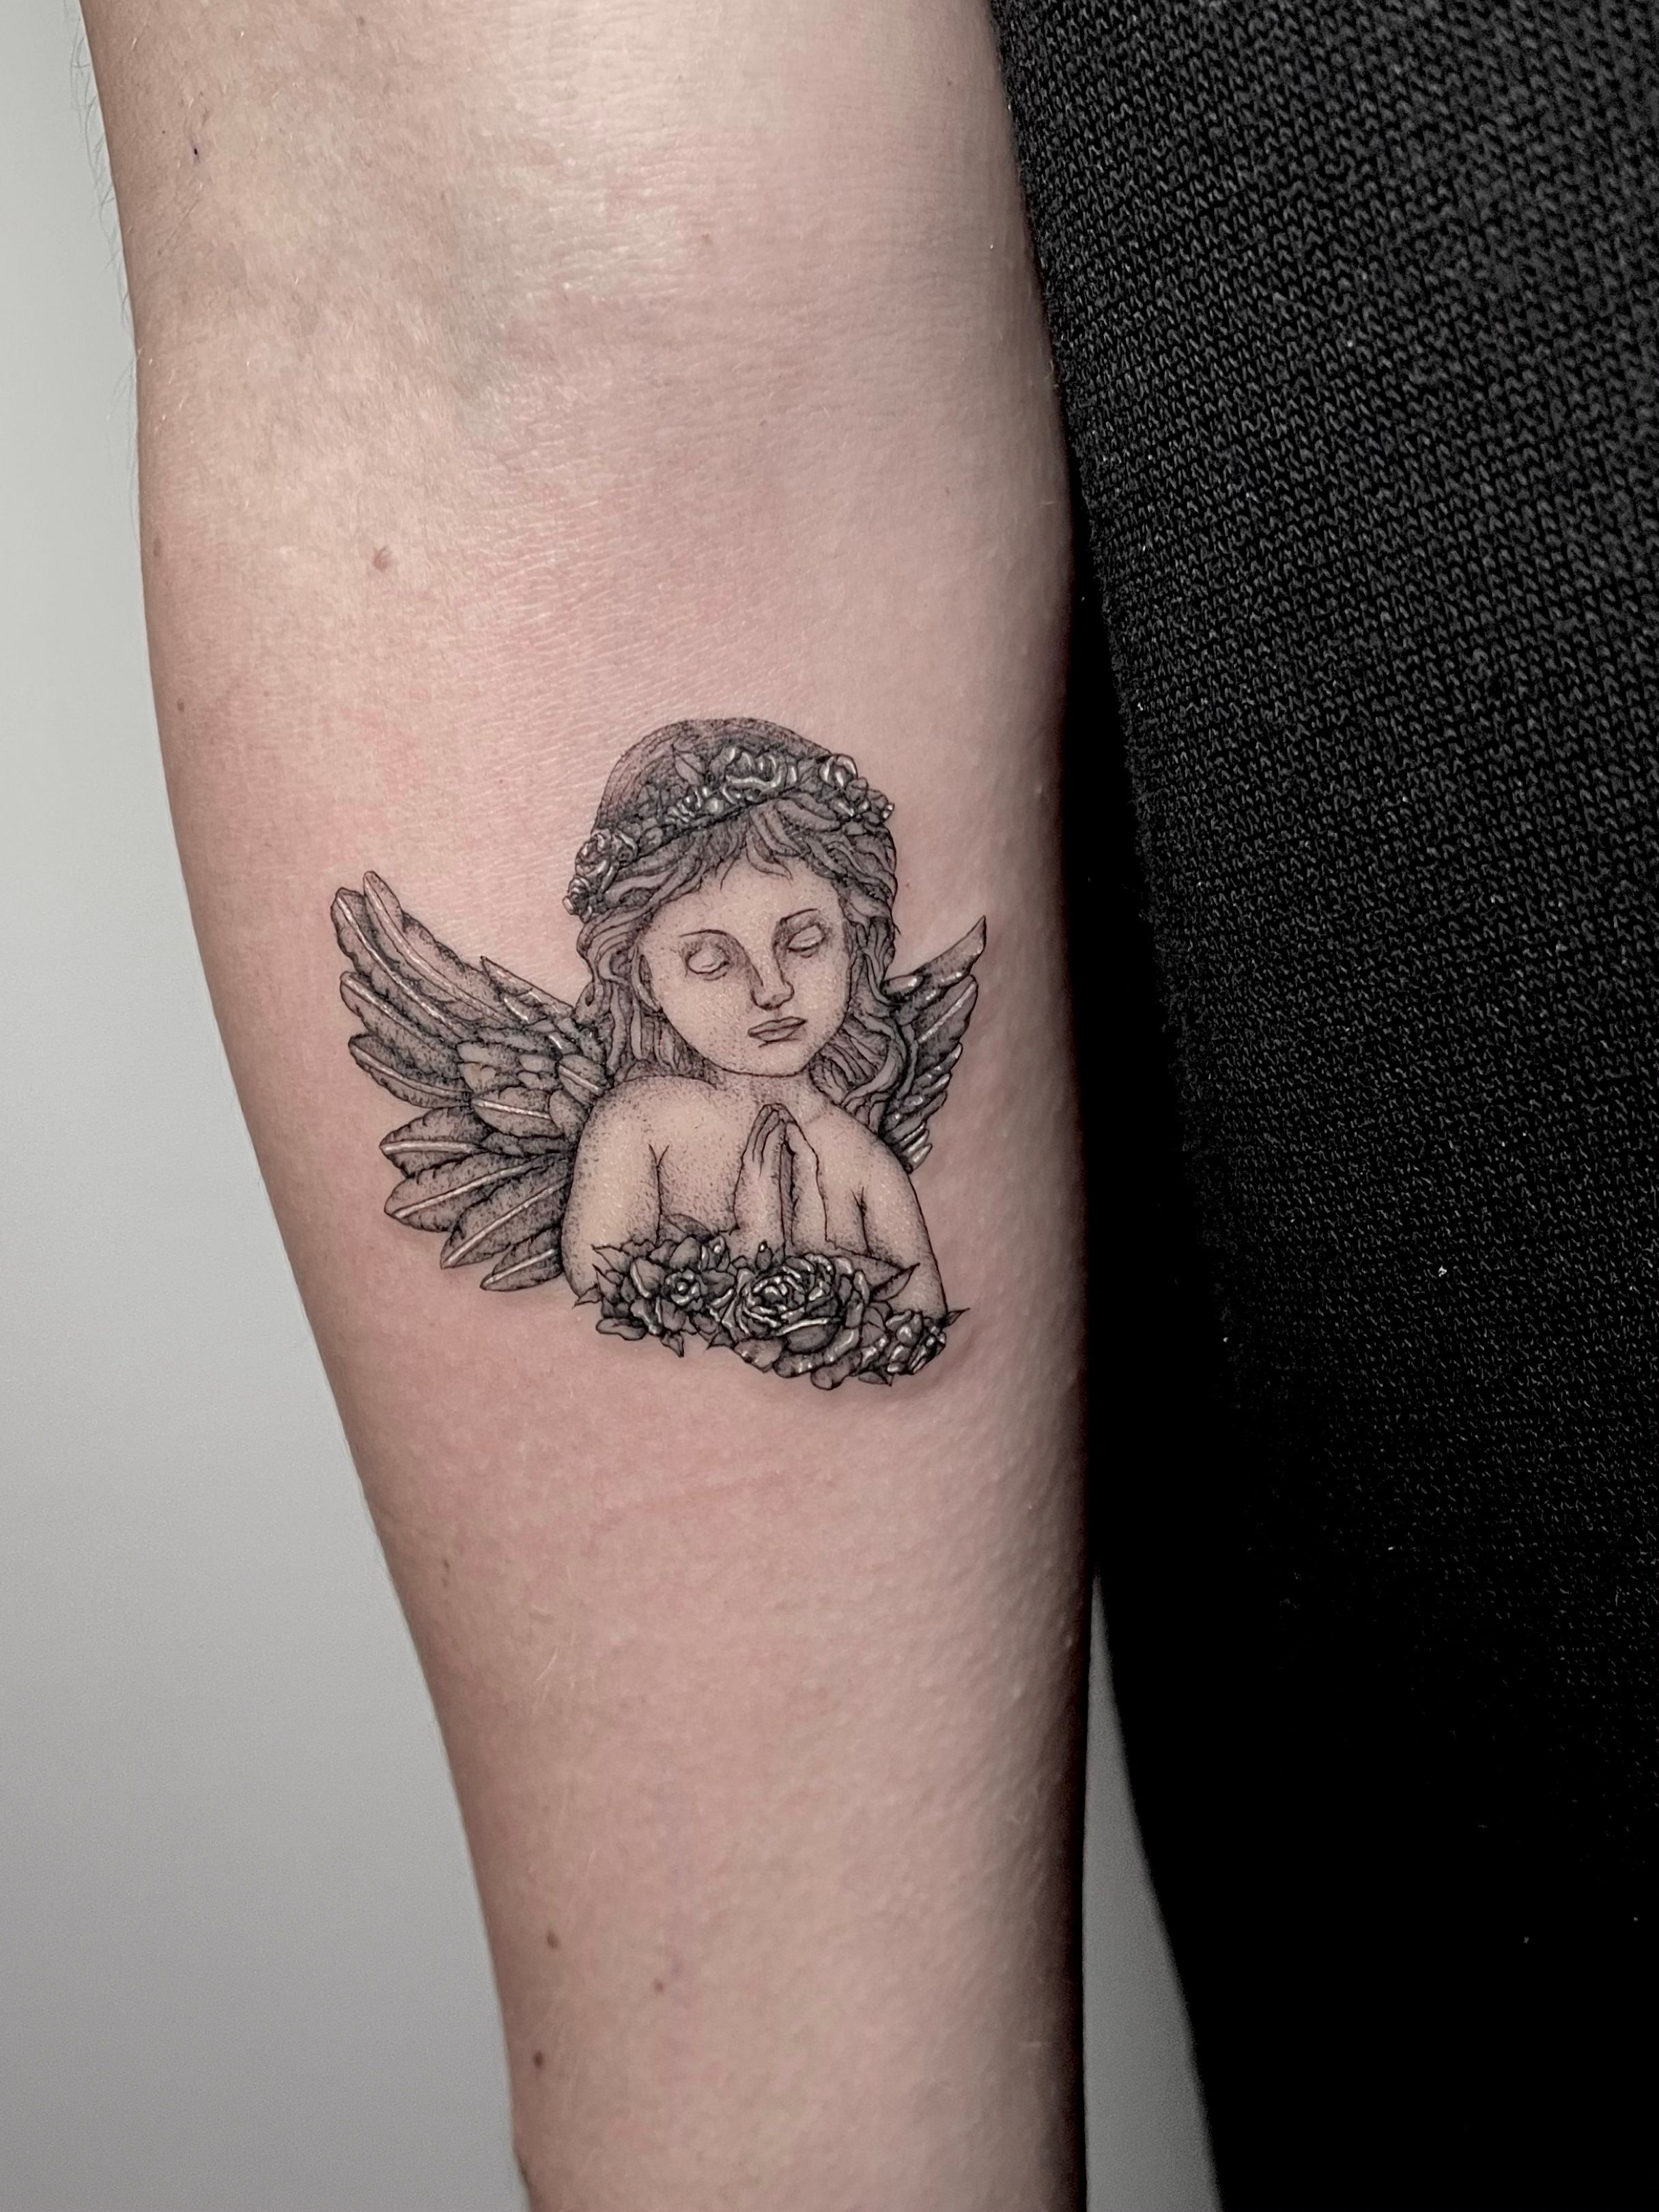 Beautiful Woman With Angel Wings Best Temporary Tattoos| WannaBeInk.com